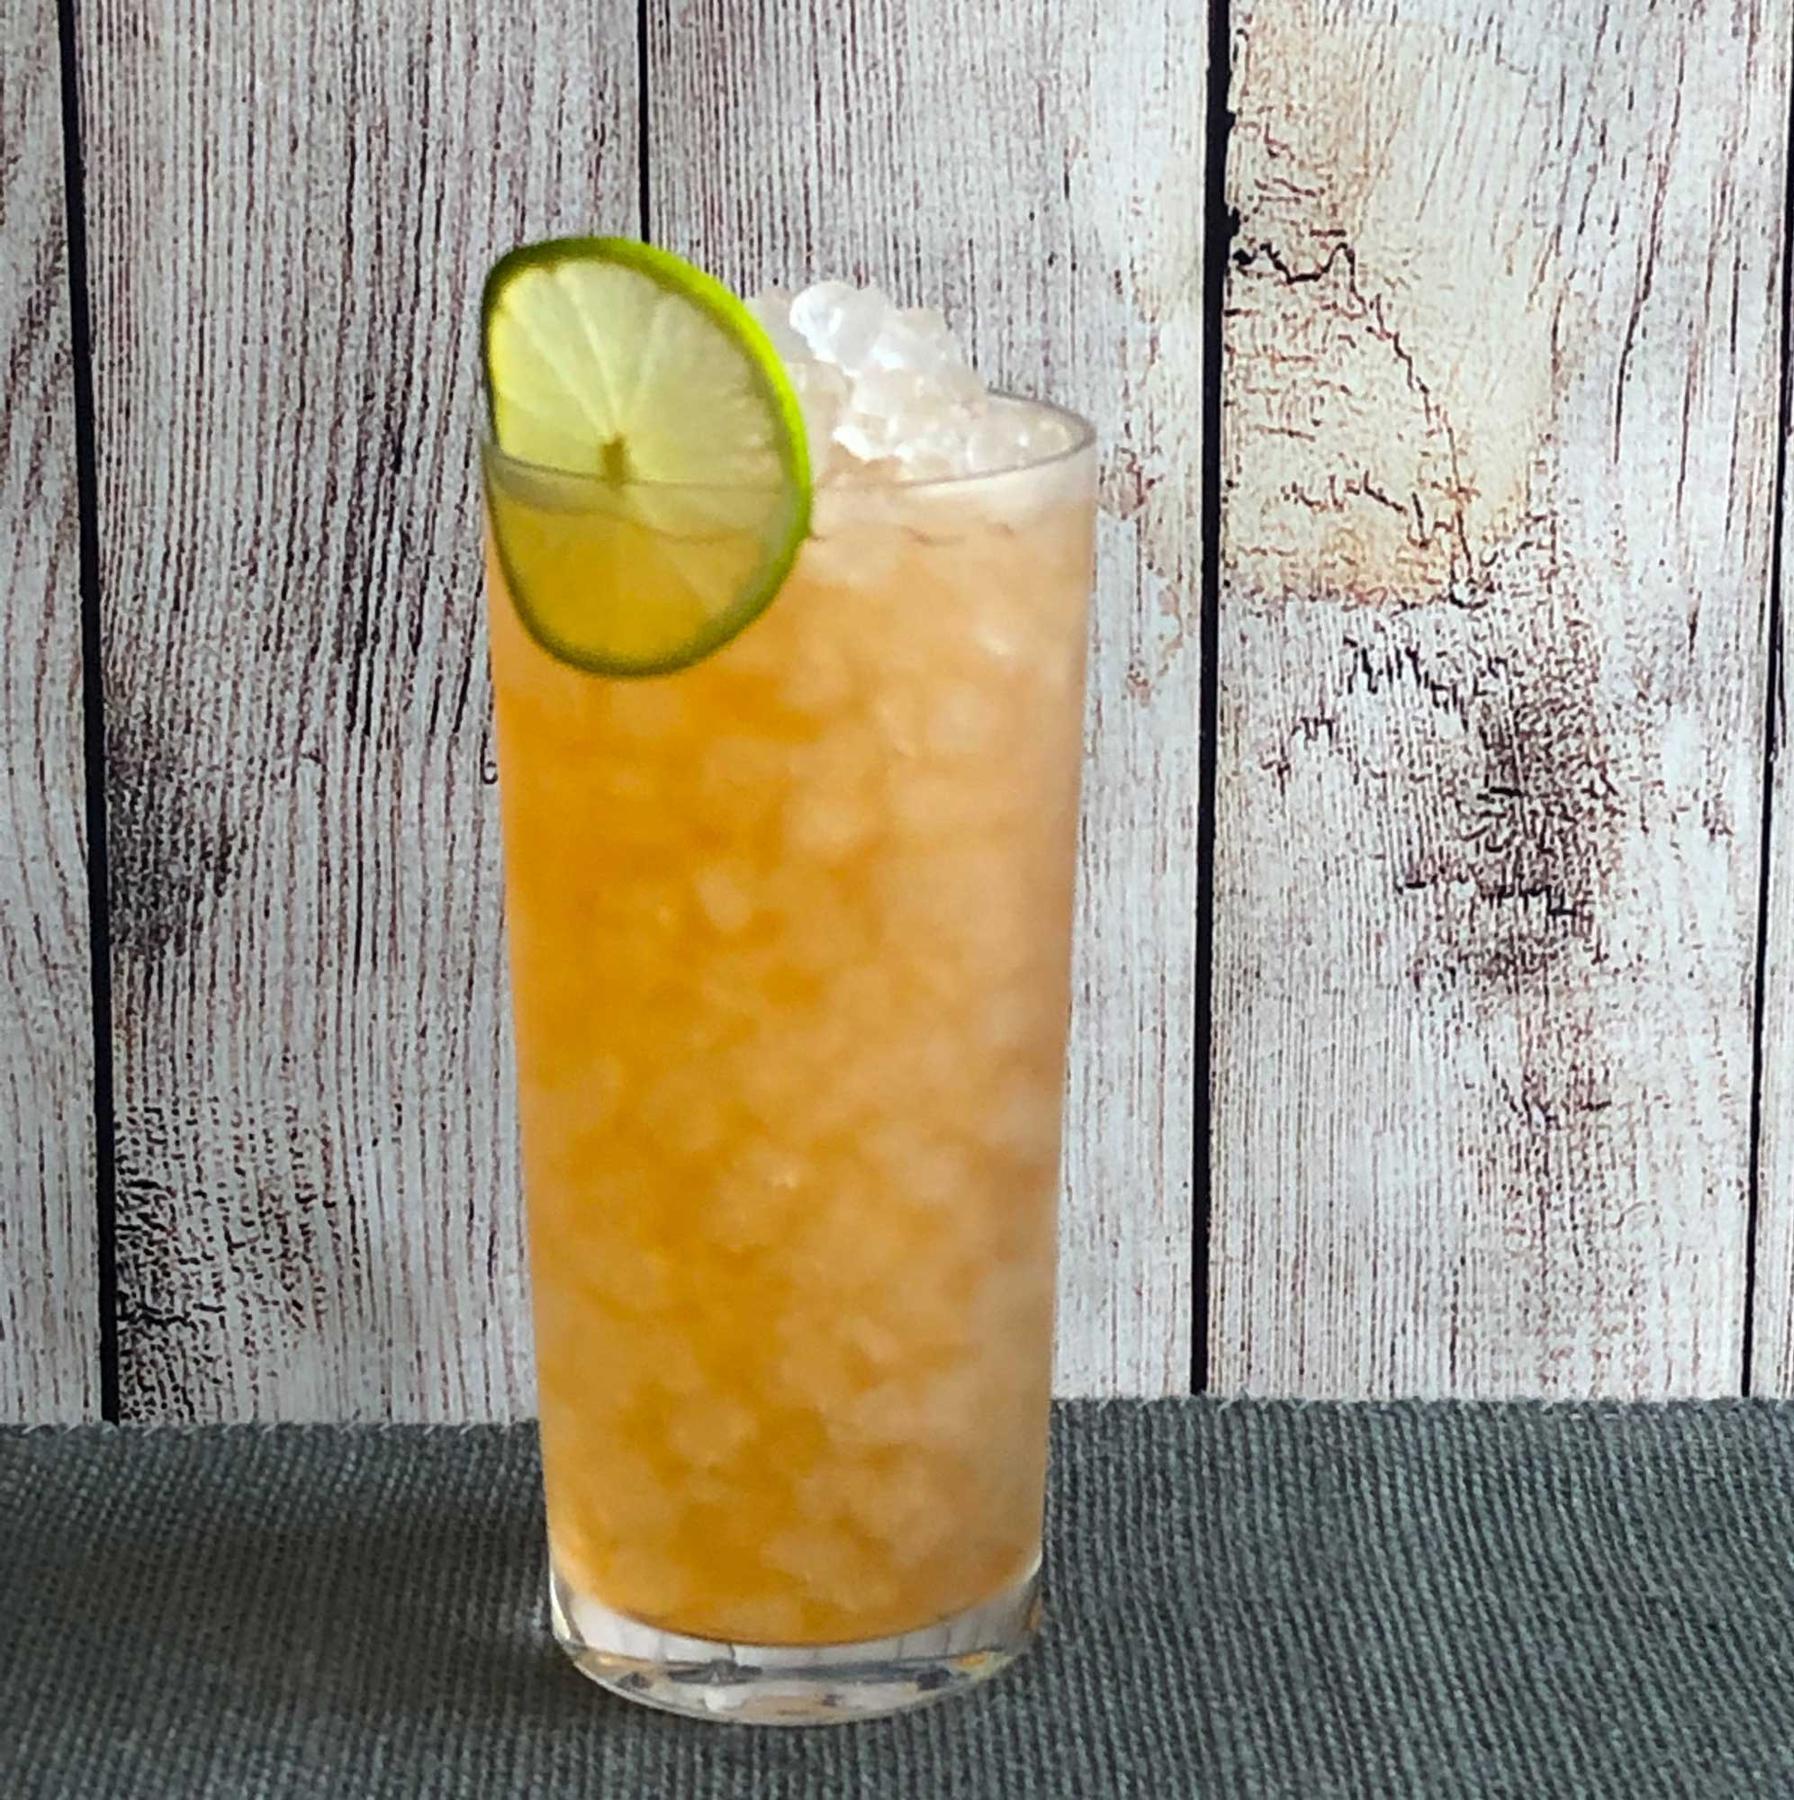 An example of the Barbados Redux, the mixed drink (drink) featuring The Scarlet Ibis Trinidad Rum, John D. Taylor’s Velvet Falernum, lime juice, Angostura bitters, and lime wheel; photo by Lee Edwards